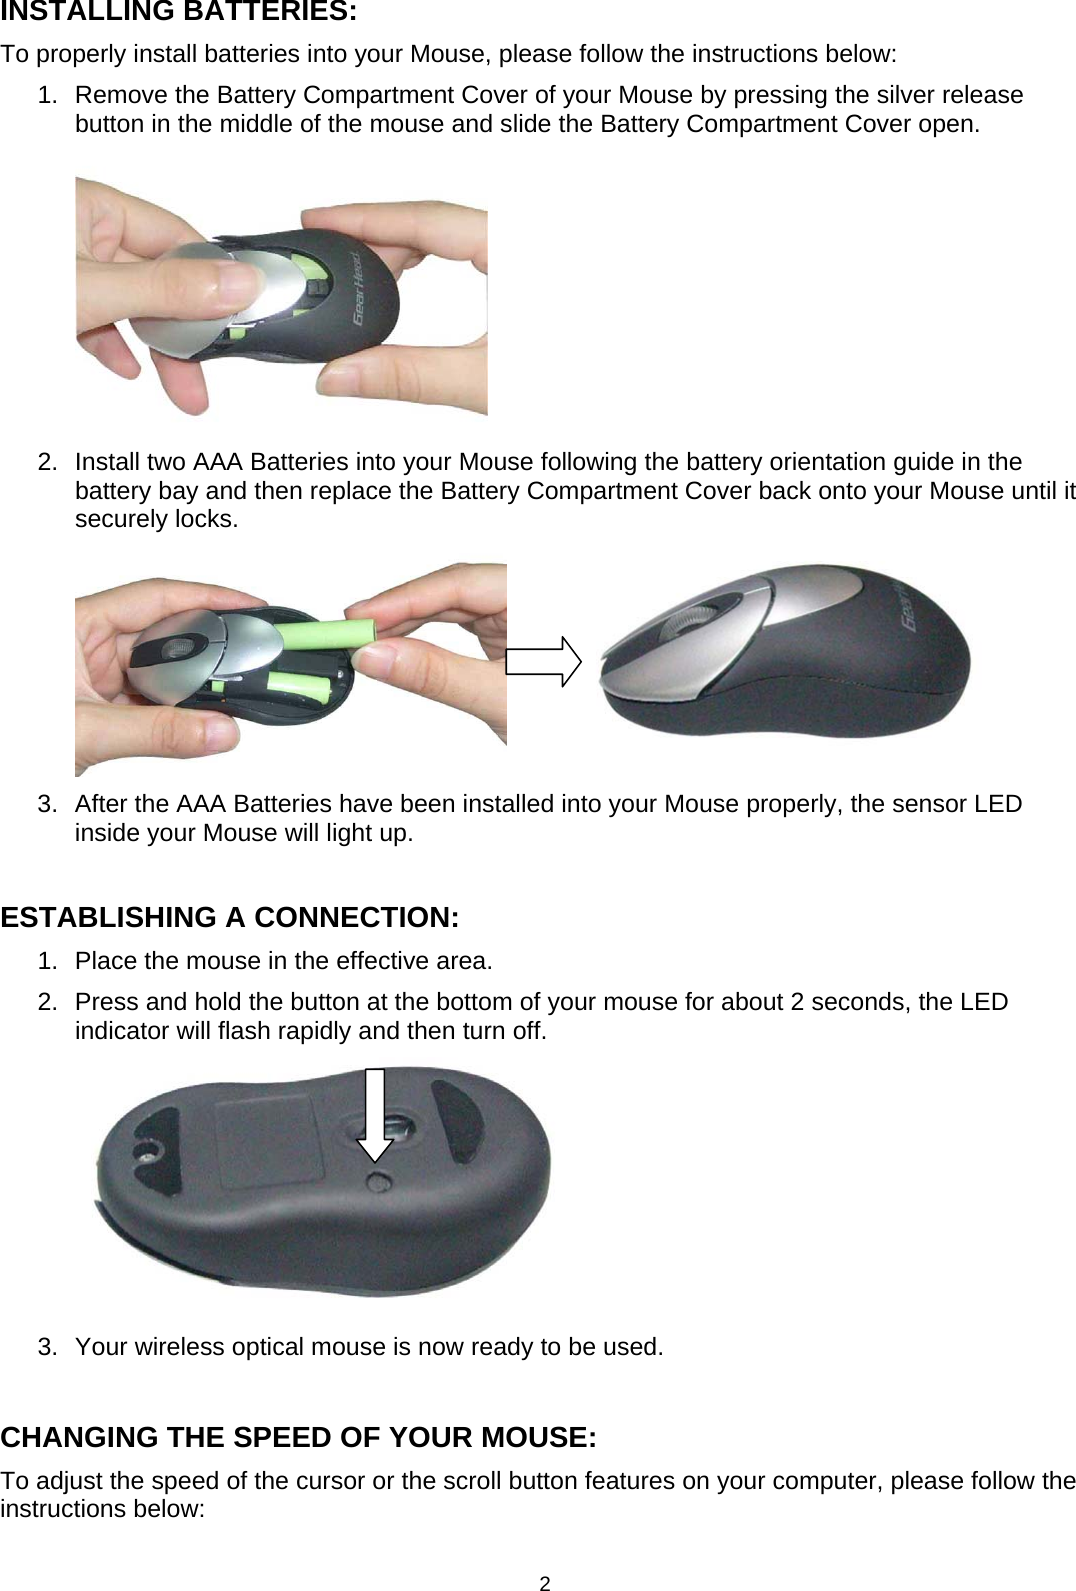 2 INSTALLING BATTERIES: To properly install batteries into your Mouse, please follow the instructions below: 1.  Remove the Battery Compartment Cover of your Mouse by pressing the silver release button in the middle of the mouse and slide the Battery Compartment Cover open.  2.  Install two AAA Batteries into your Mouse following the battery orientation guide in the battery bay and then replace the Battery Compartment Cover back onto your Mouse until it securely locks.              3.  After the AAA Batteries have been installed into your Mouse properly, the sensor LED inside your Mouse will light up.  ESTABLISHING A CONNECTION: 1.  Place the mouse in the effective area. 2.  Press and hold the button at the bottom of your mouse for about 2 seconds, the LED indicator will flash rapidly and then turn off.     3.  Your wireless optical mouse is now ready to be used.  CHANGING THE SPEED OF YOUR MOUSE: To adjust the speed of the cursor or the scroll button features on your computer, please follow the instructions below:  